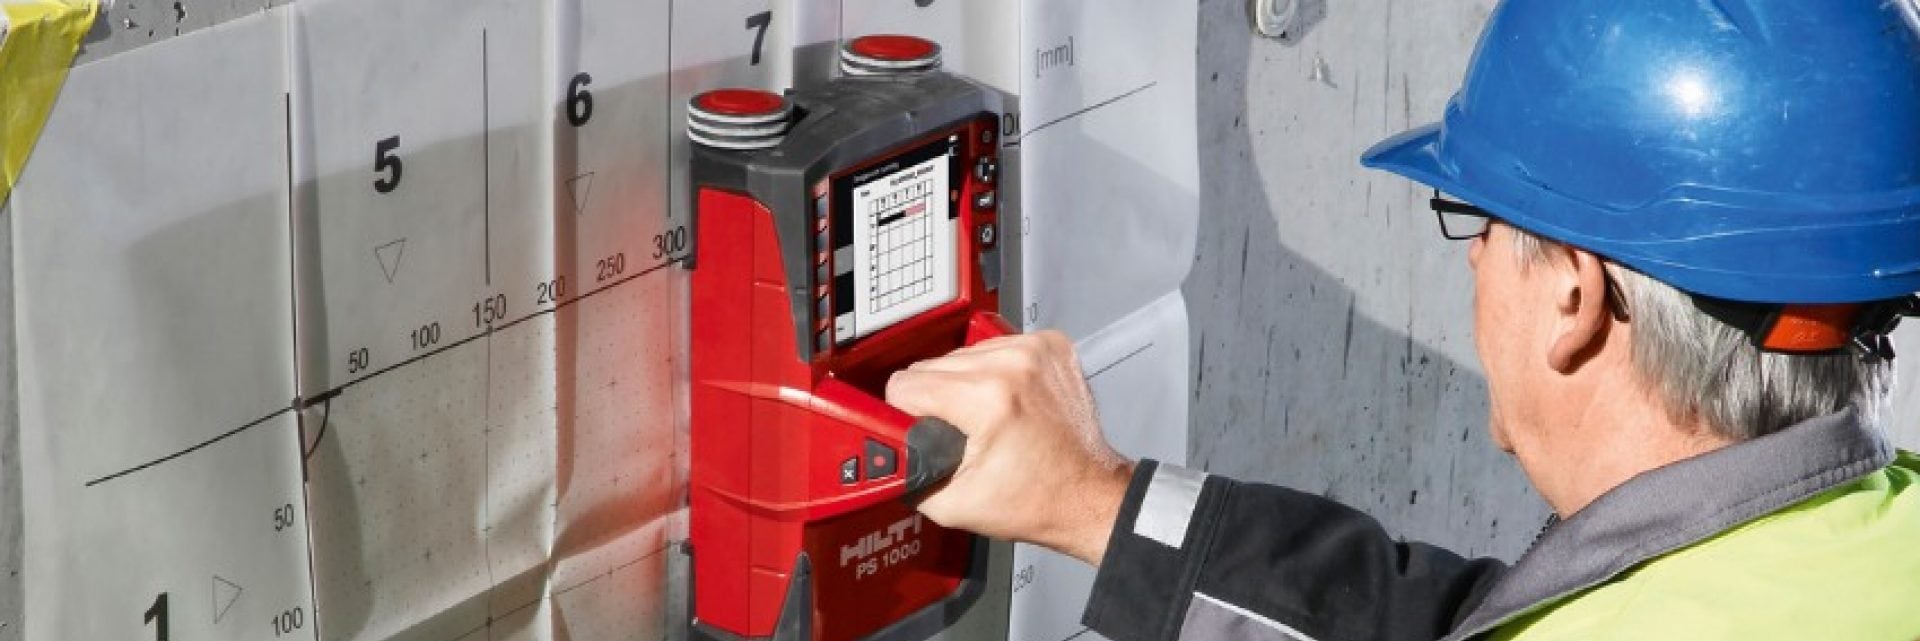 Hilti PS 1000 x-scan detection system